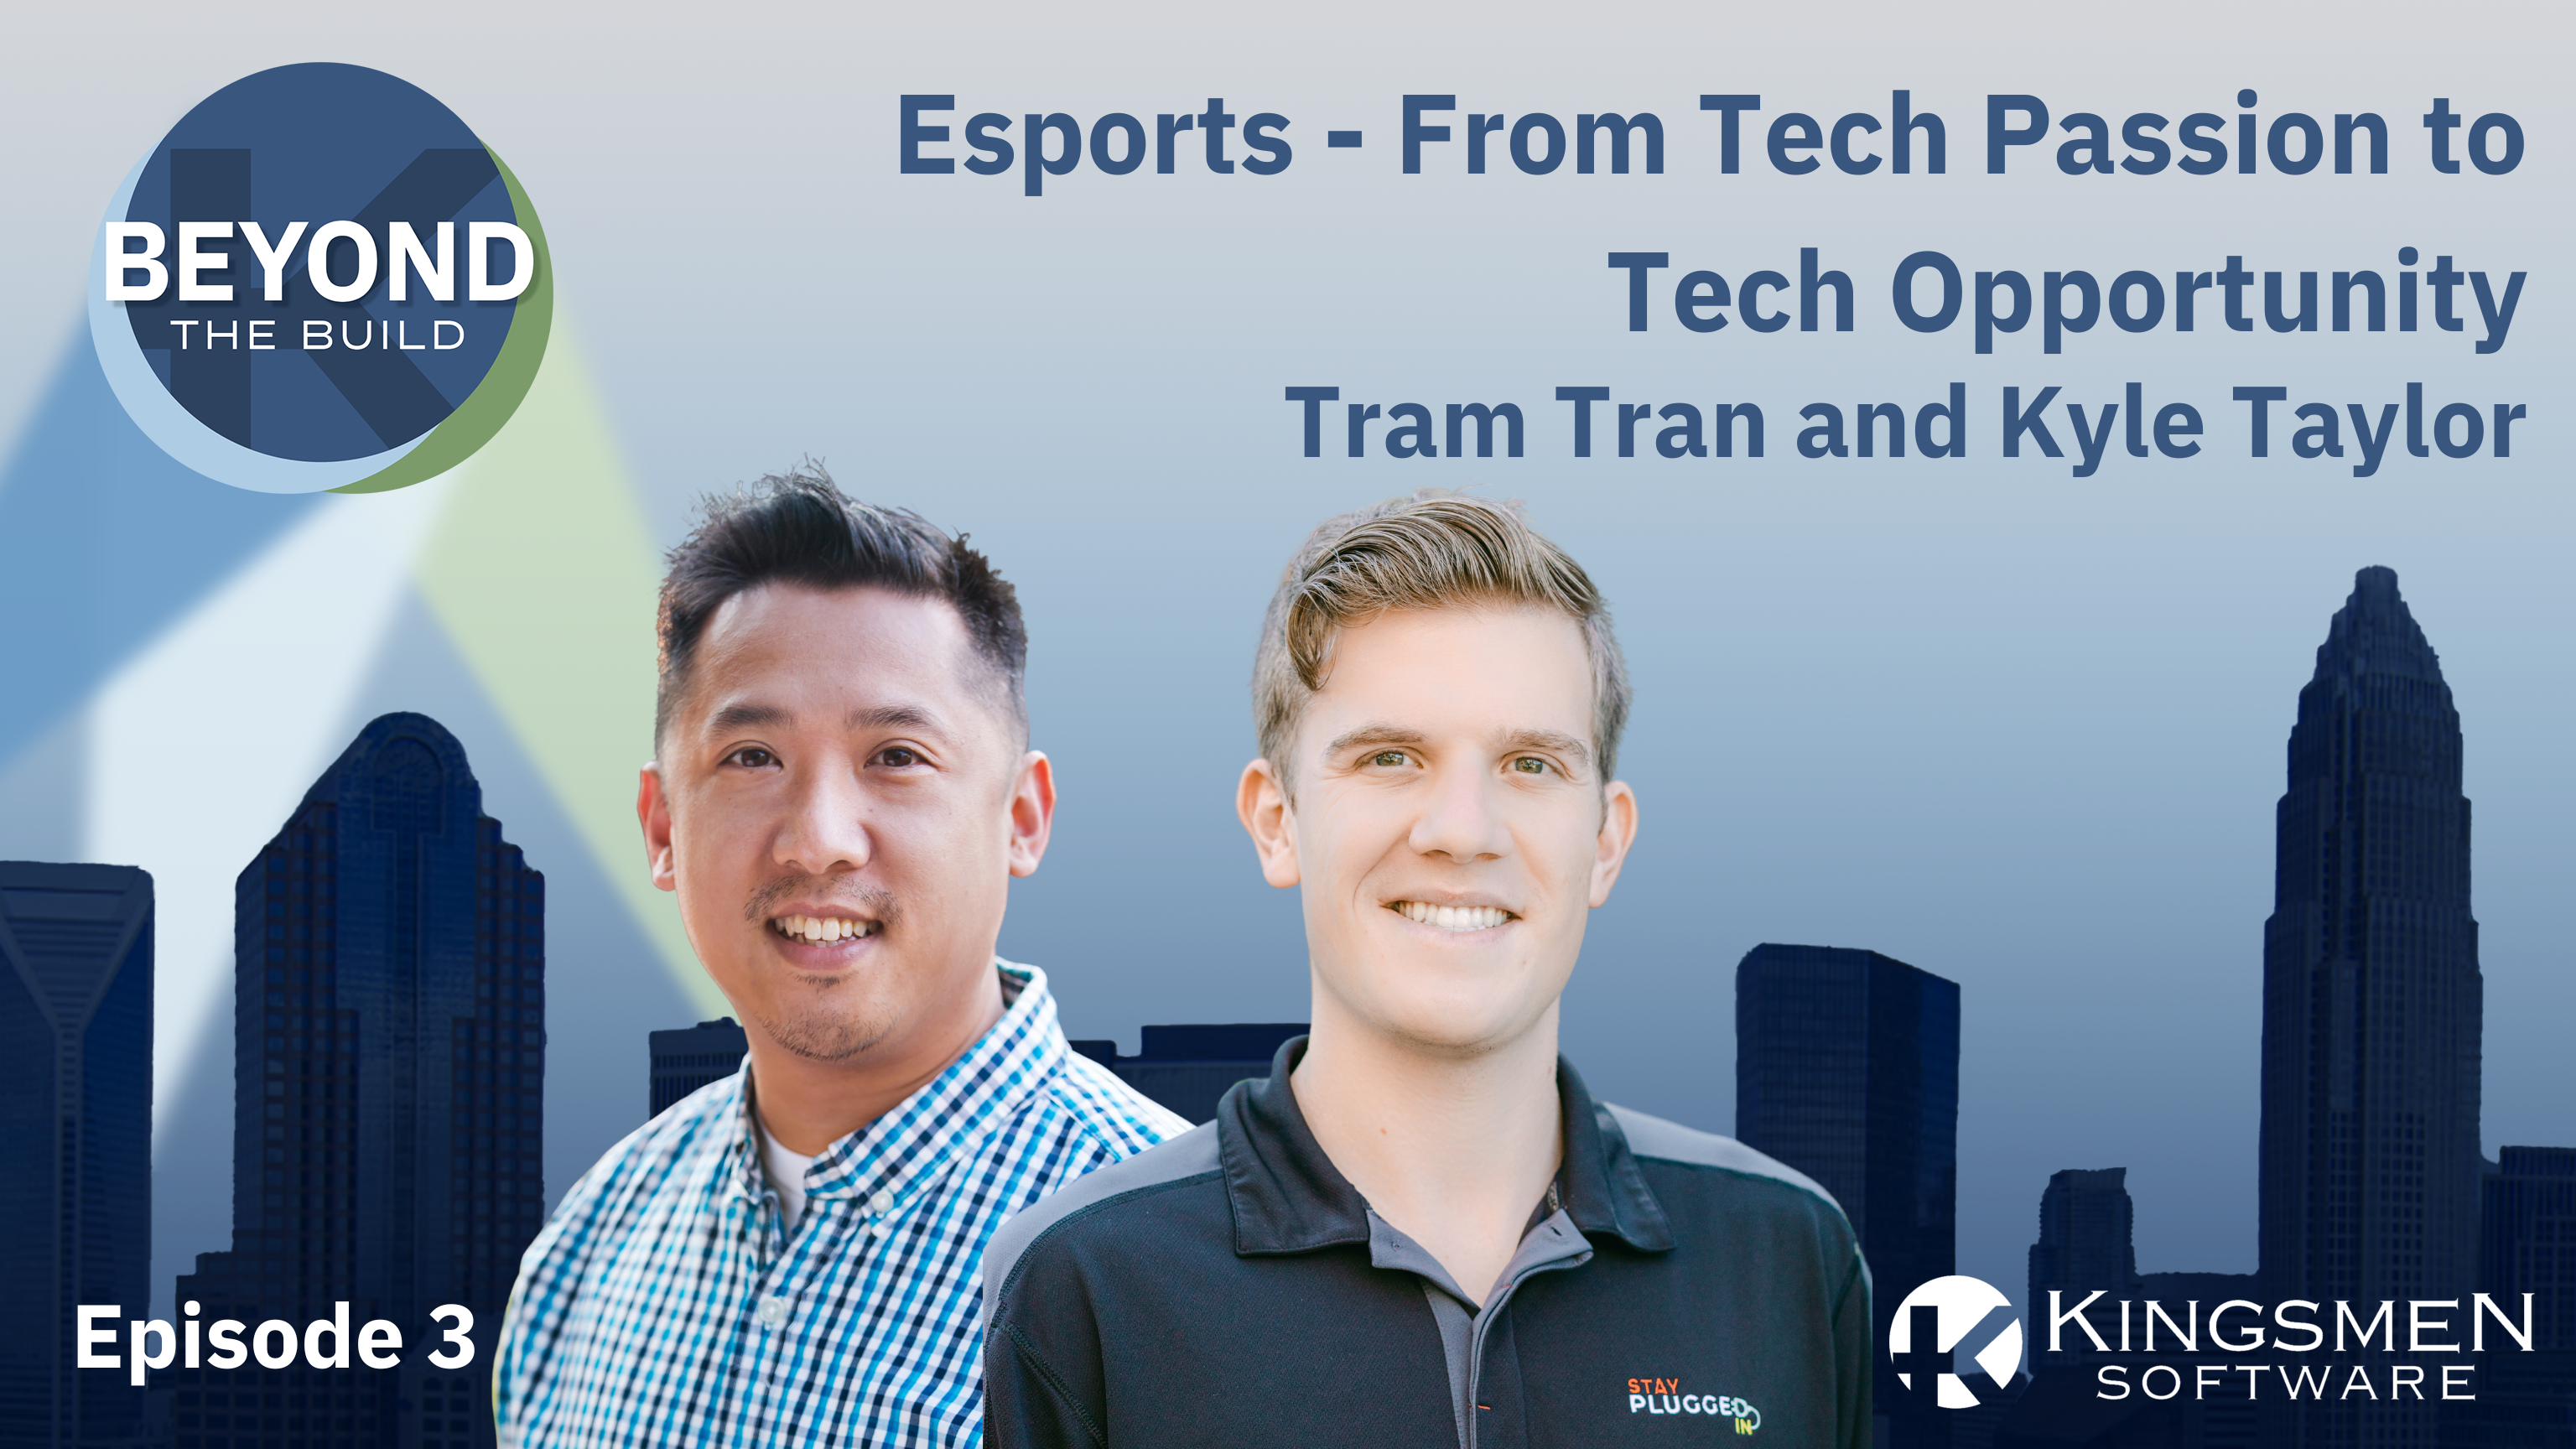 Episode 3: Esports - From Tech Passion to Tech Opportunity